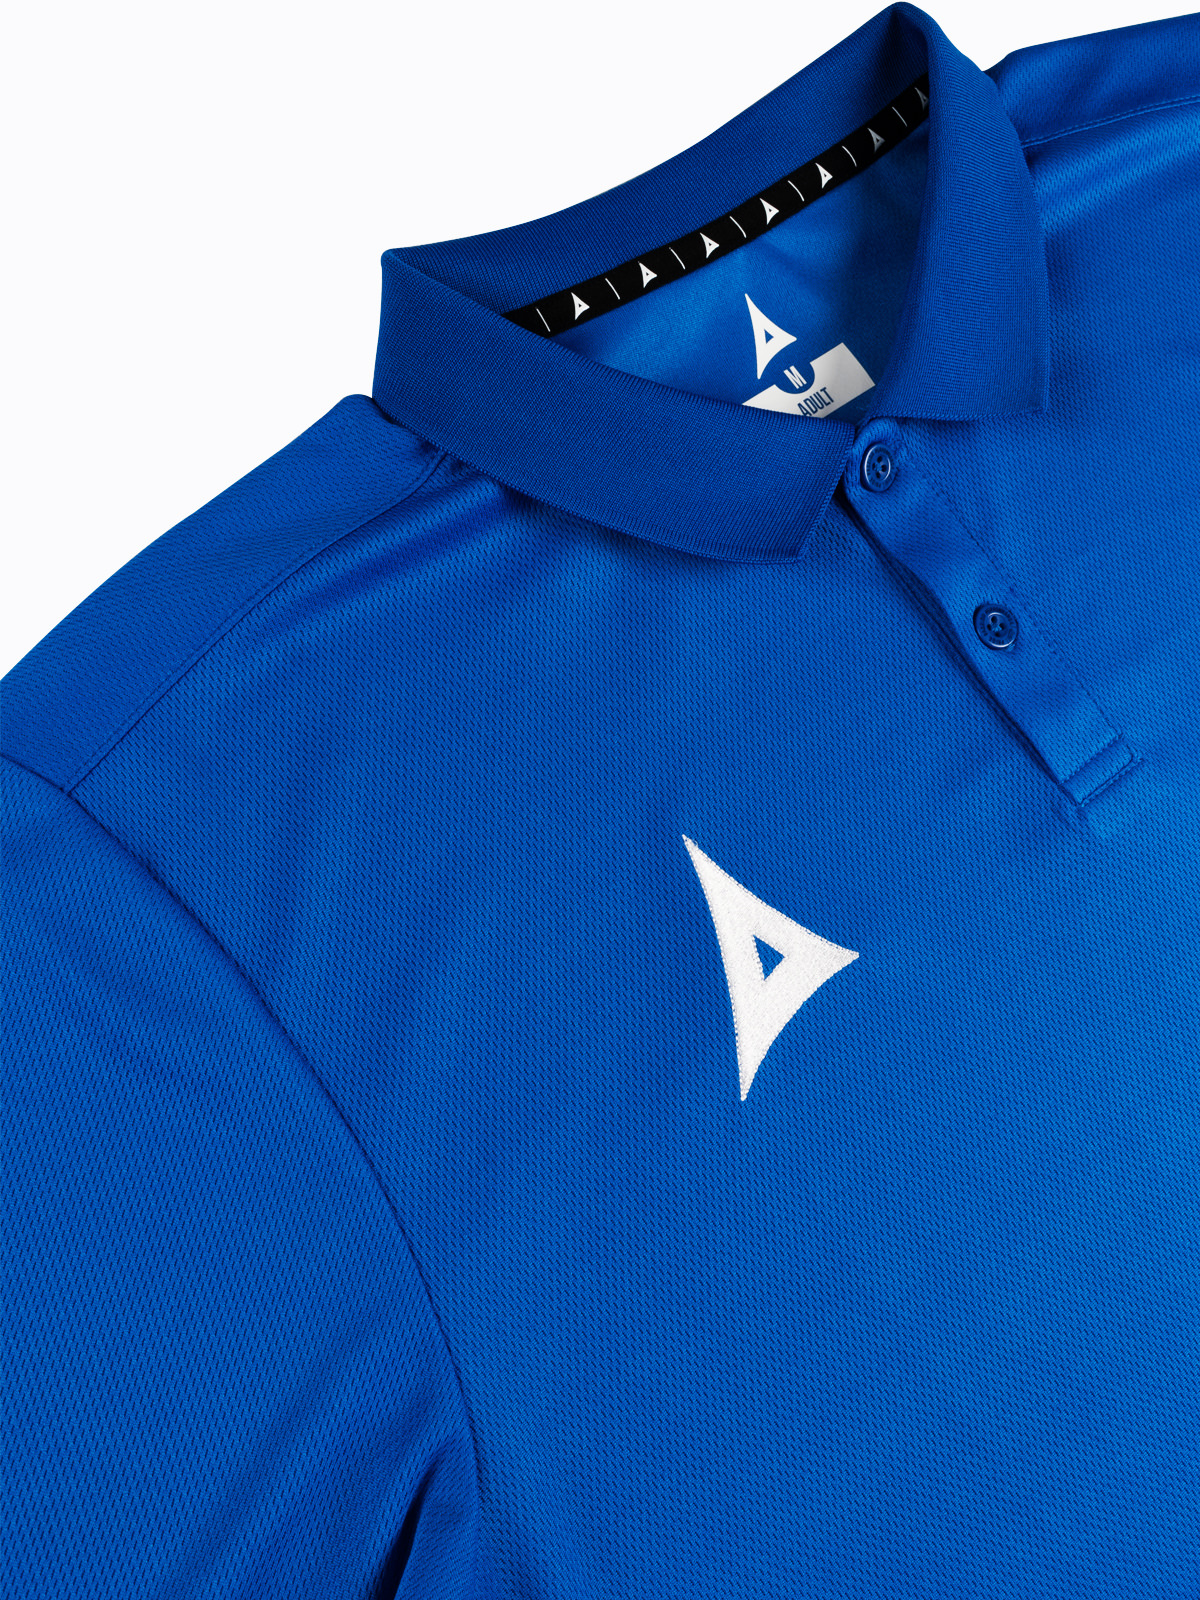 picture of focus 2 tech polo - royal